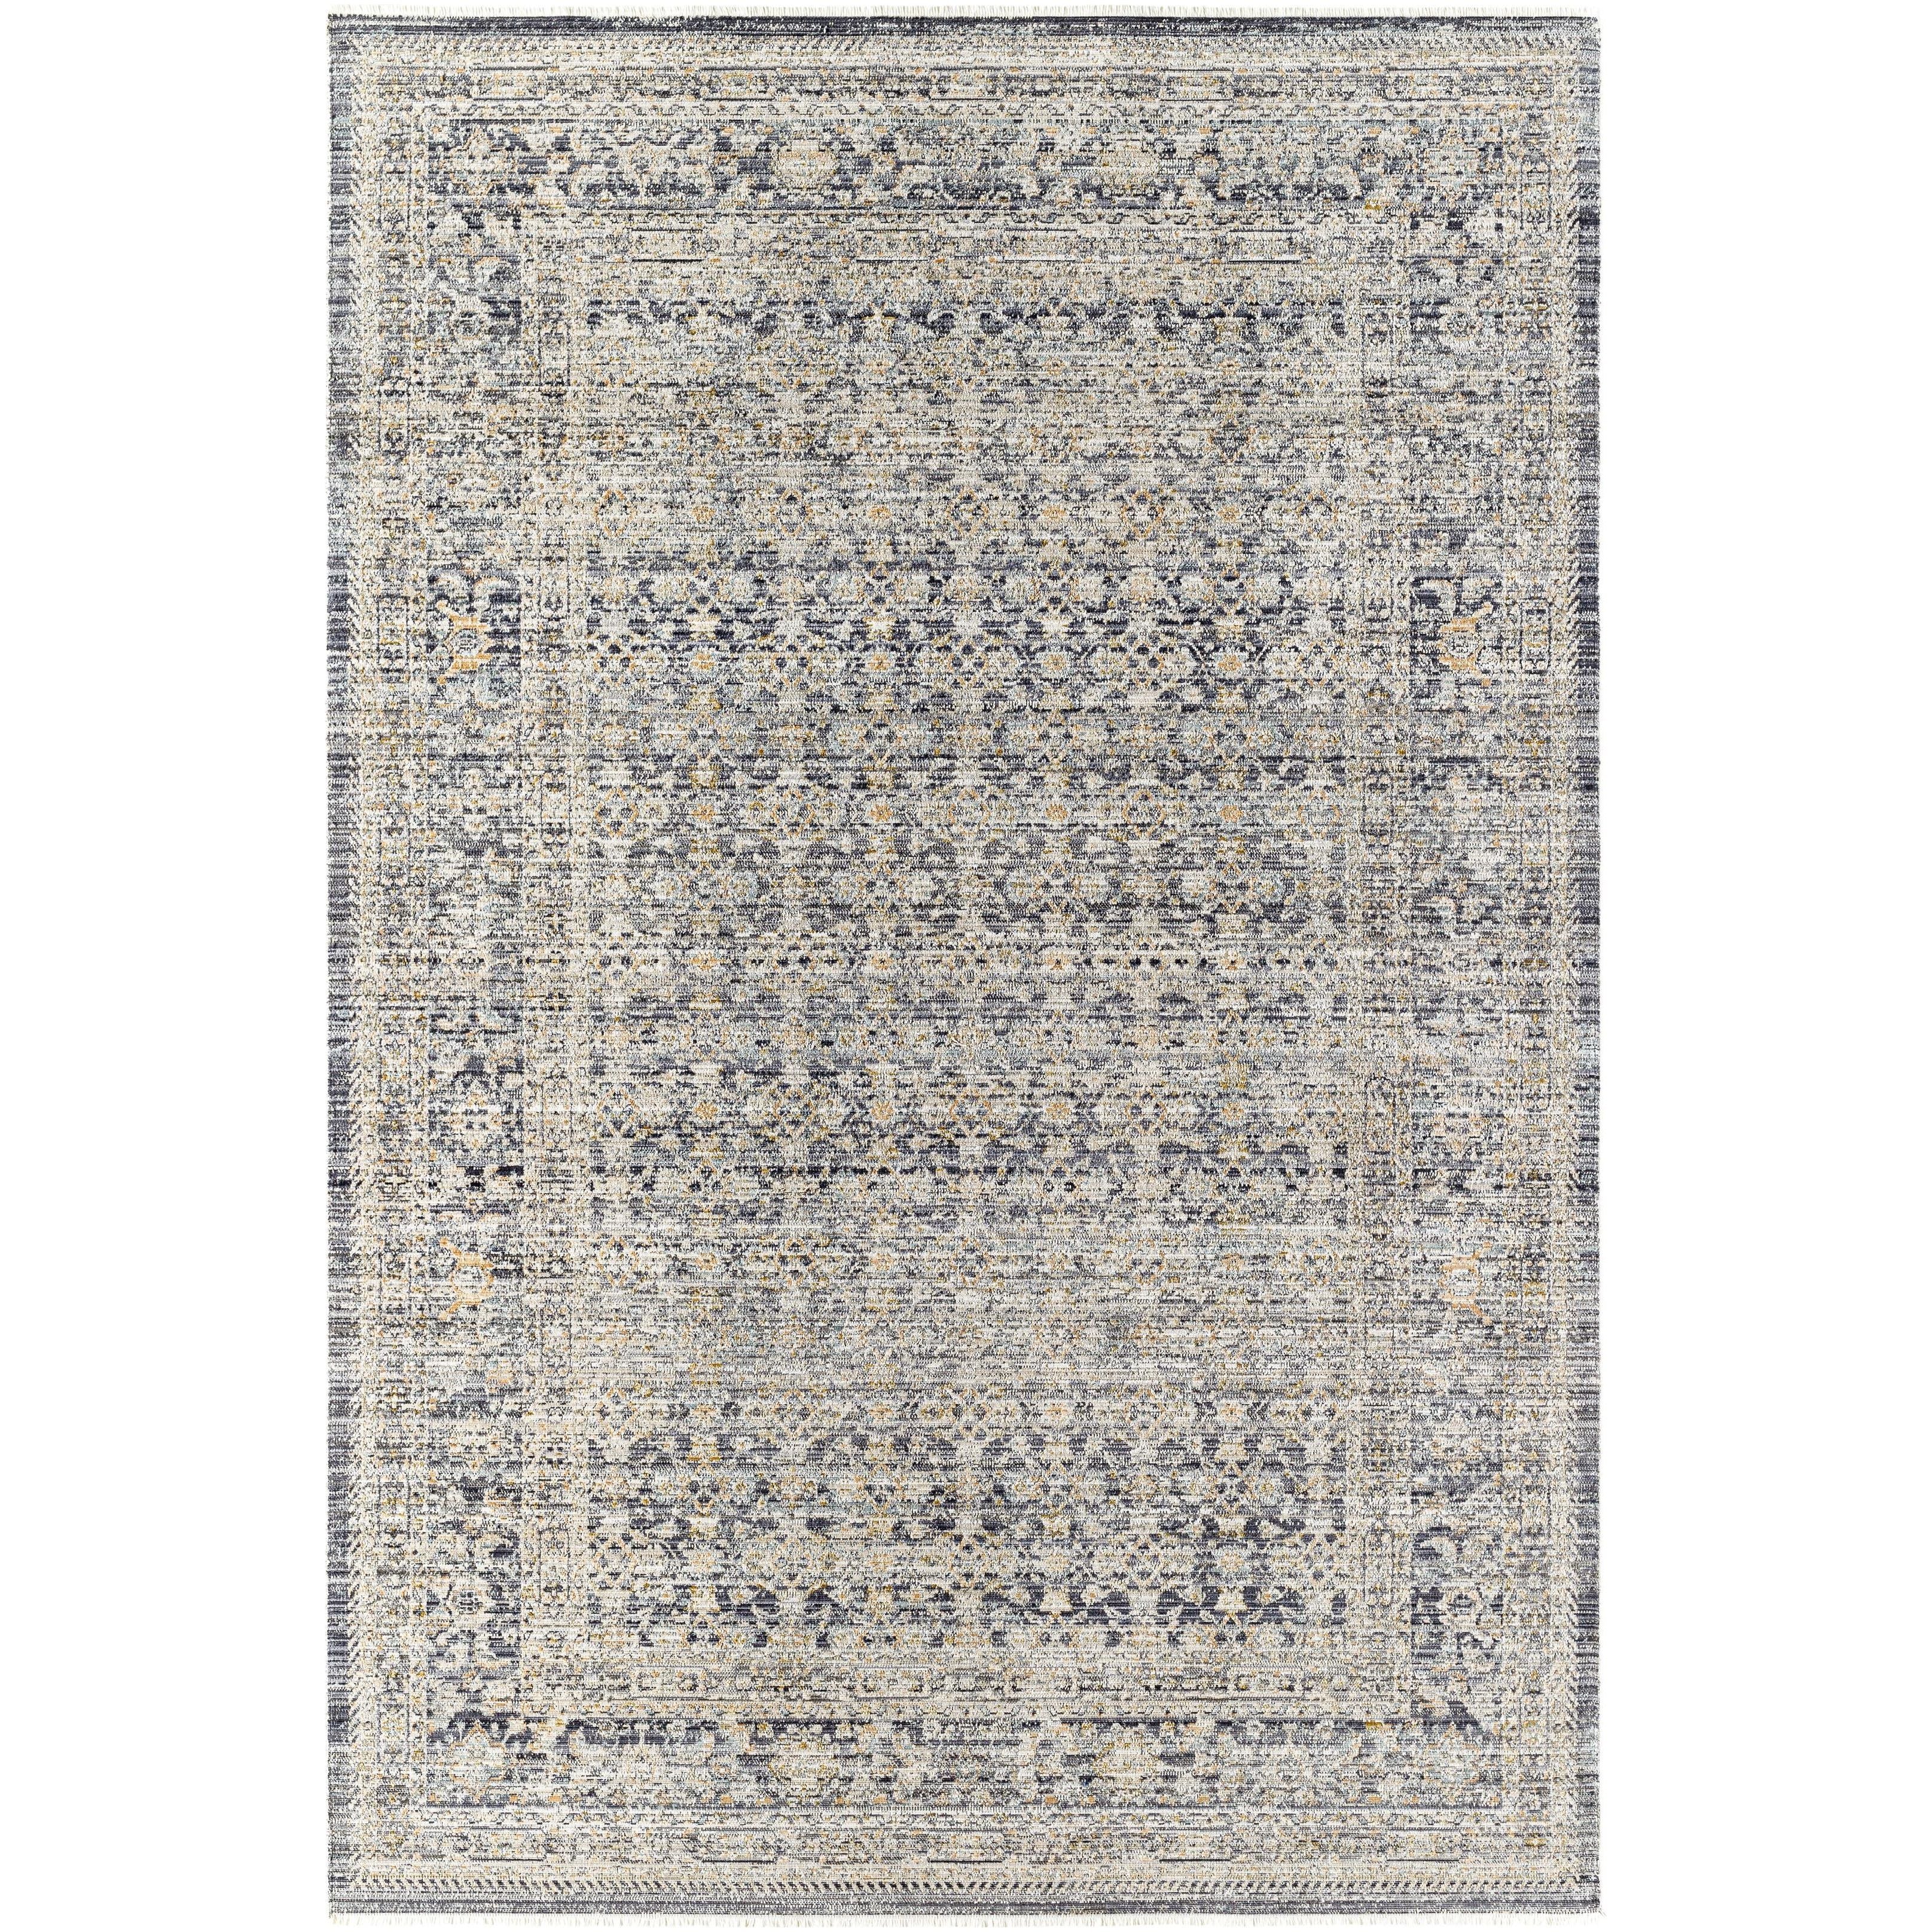 Introducing the Margaret area rug, the perfect combination of timeless style and modern sophistication! This unique rug from our Becki Owens x Surya collaboration features a distressed vintage design that is sure to bring a cozy, inviting atmosphere to any space. Amethyst Home provides interior design, new home construction design consulting, vintage area rugs, and lighting in the Kansas City metro area.